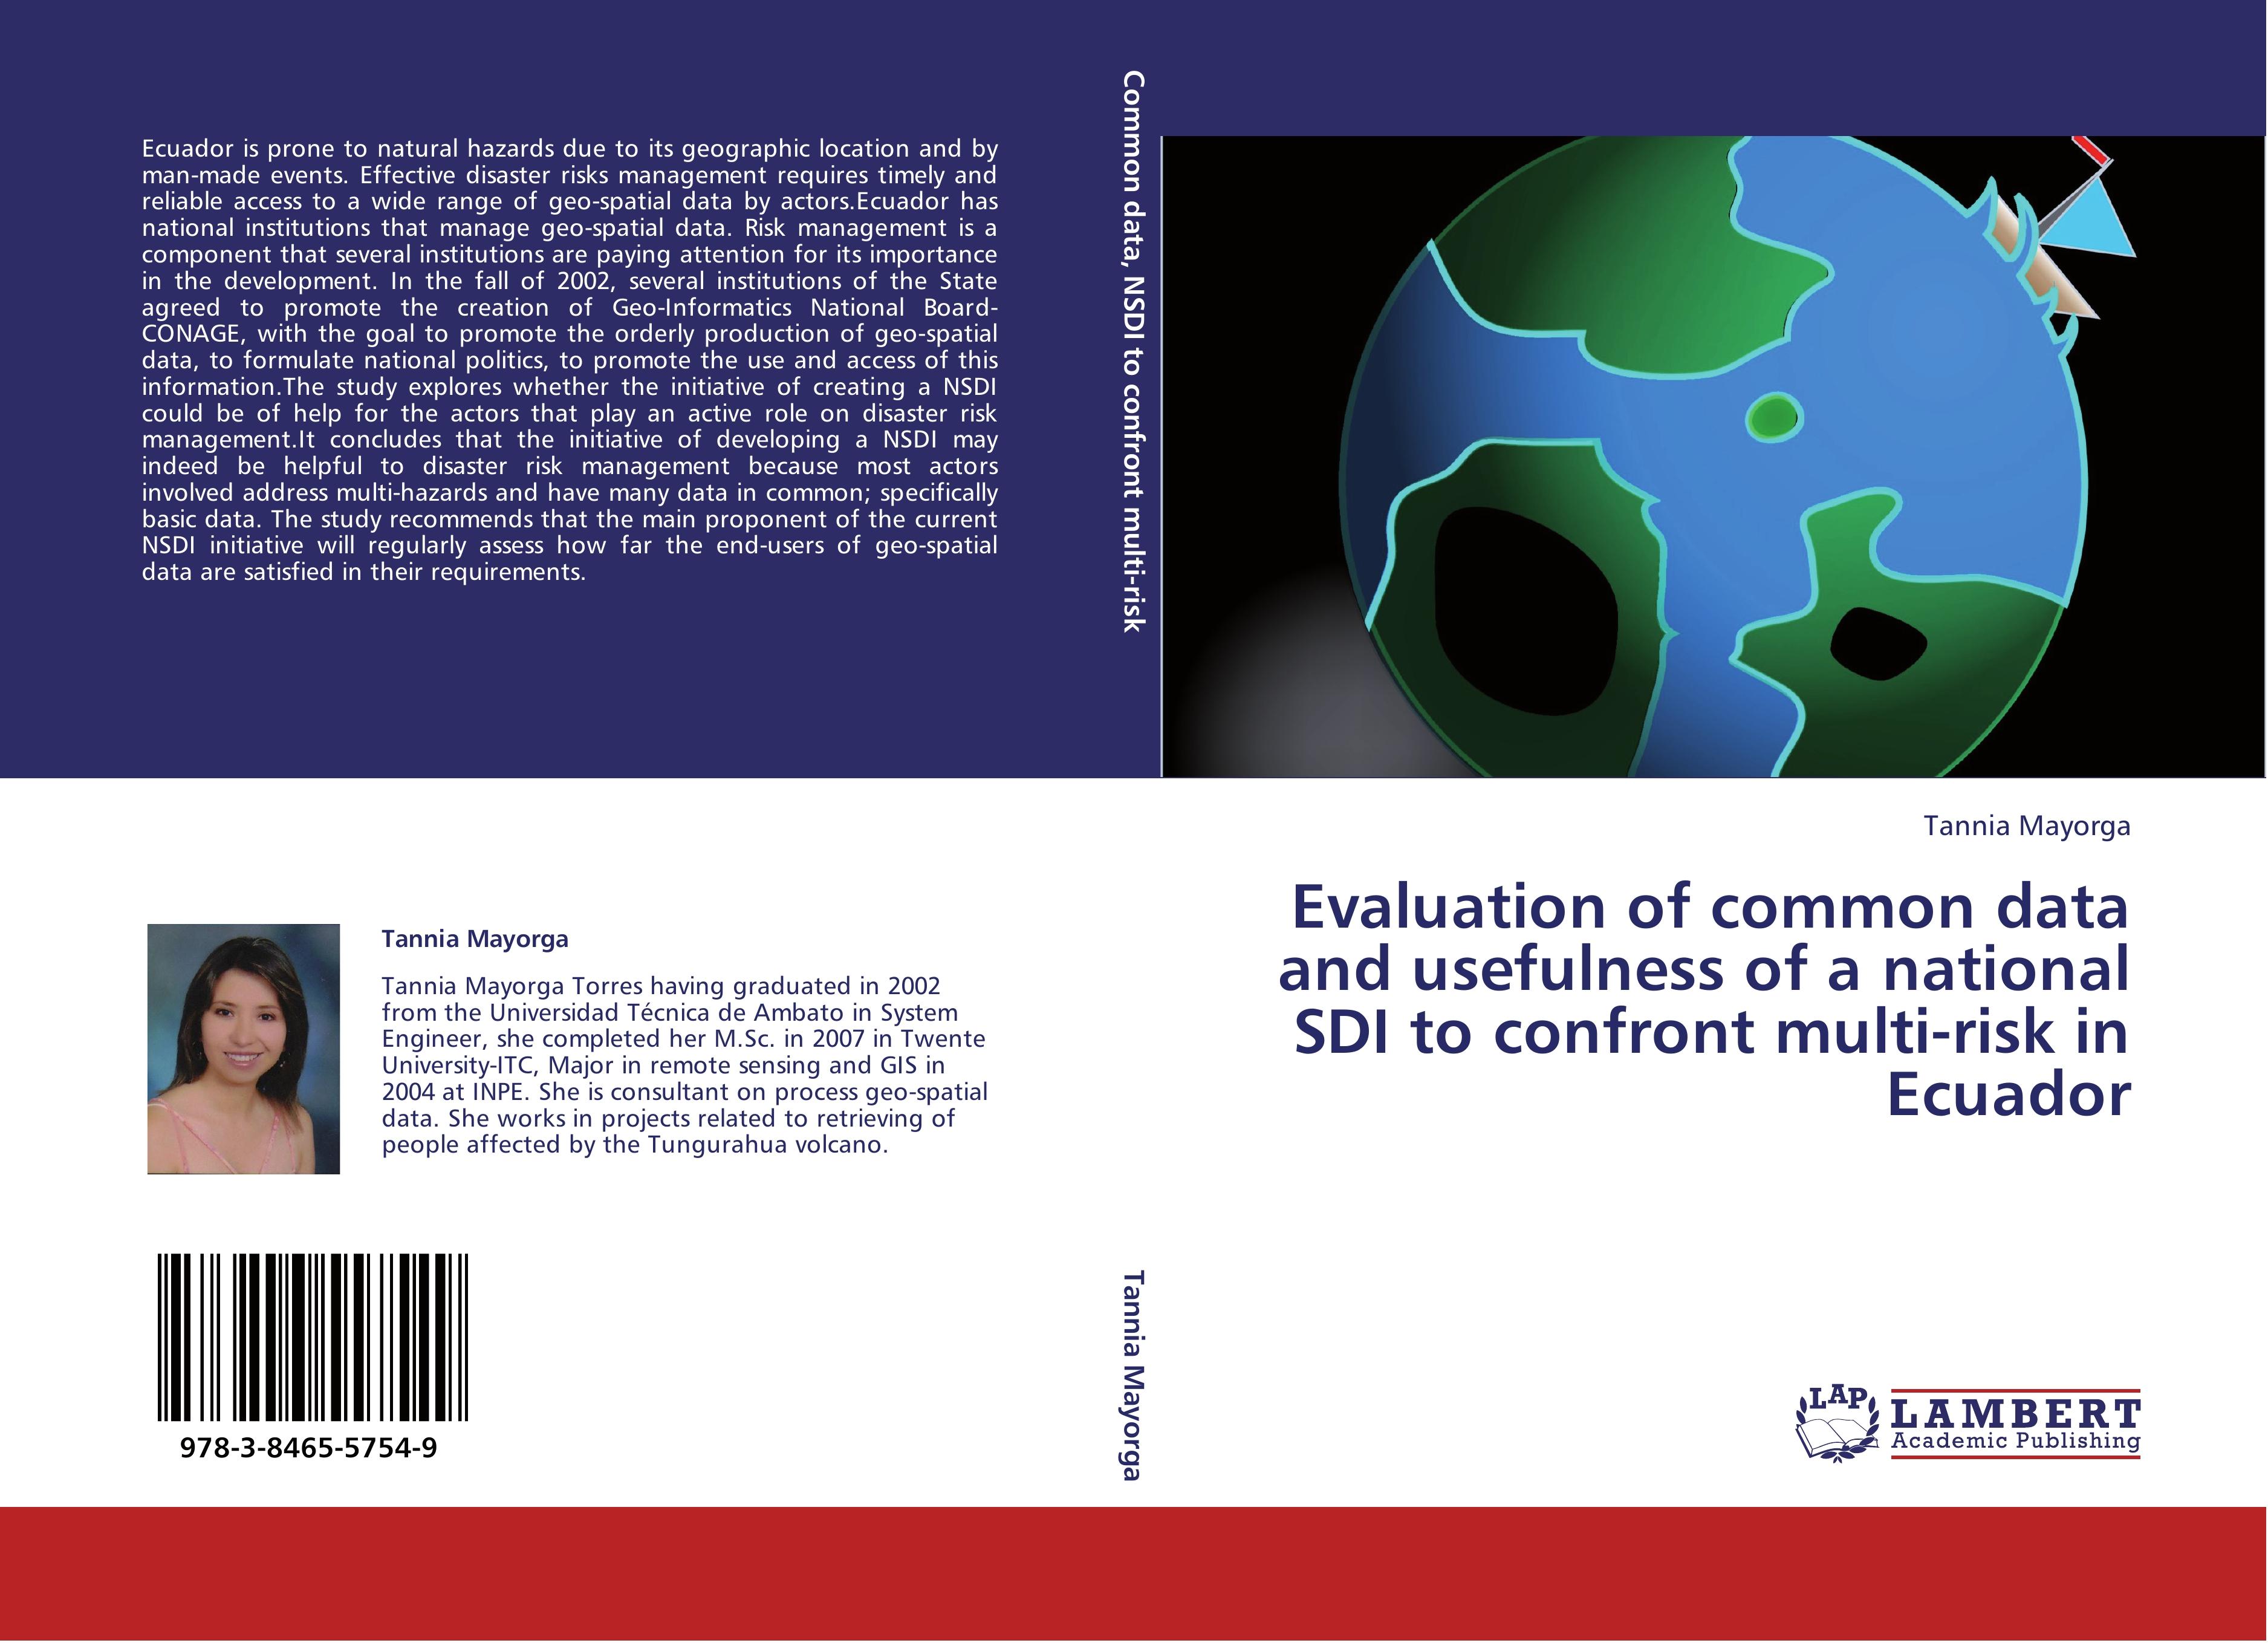 Evaluation of common data and usefulness of a national SDI to confront multi-risk in Ecuador / Tannia Mayorga / Taschenbuch / Paperback / 124 S. / Englisch / 2012 / LAP LAMBERT Academic Publishing - Mayorga, Tannia